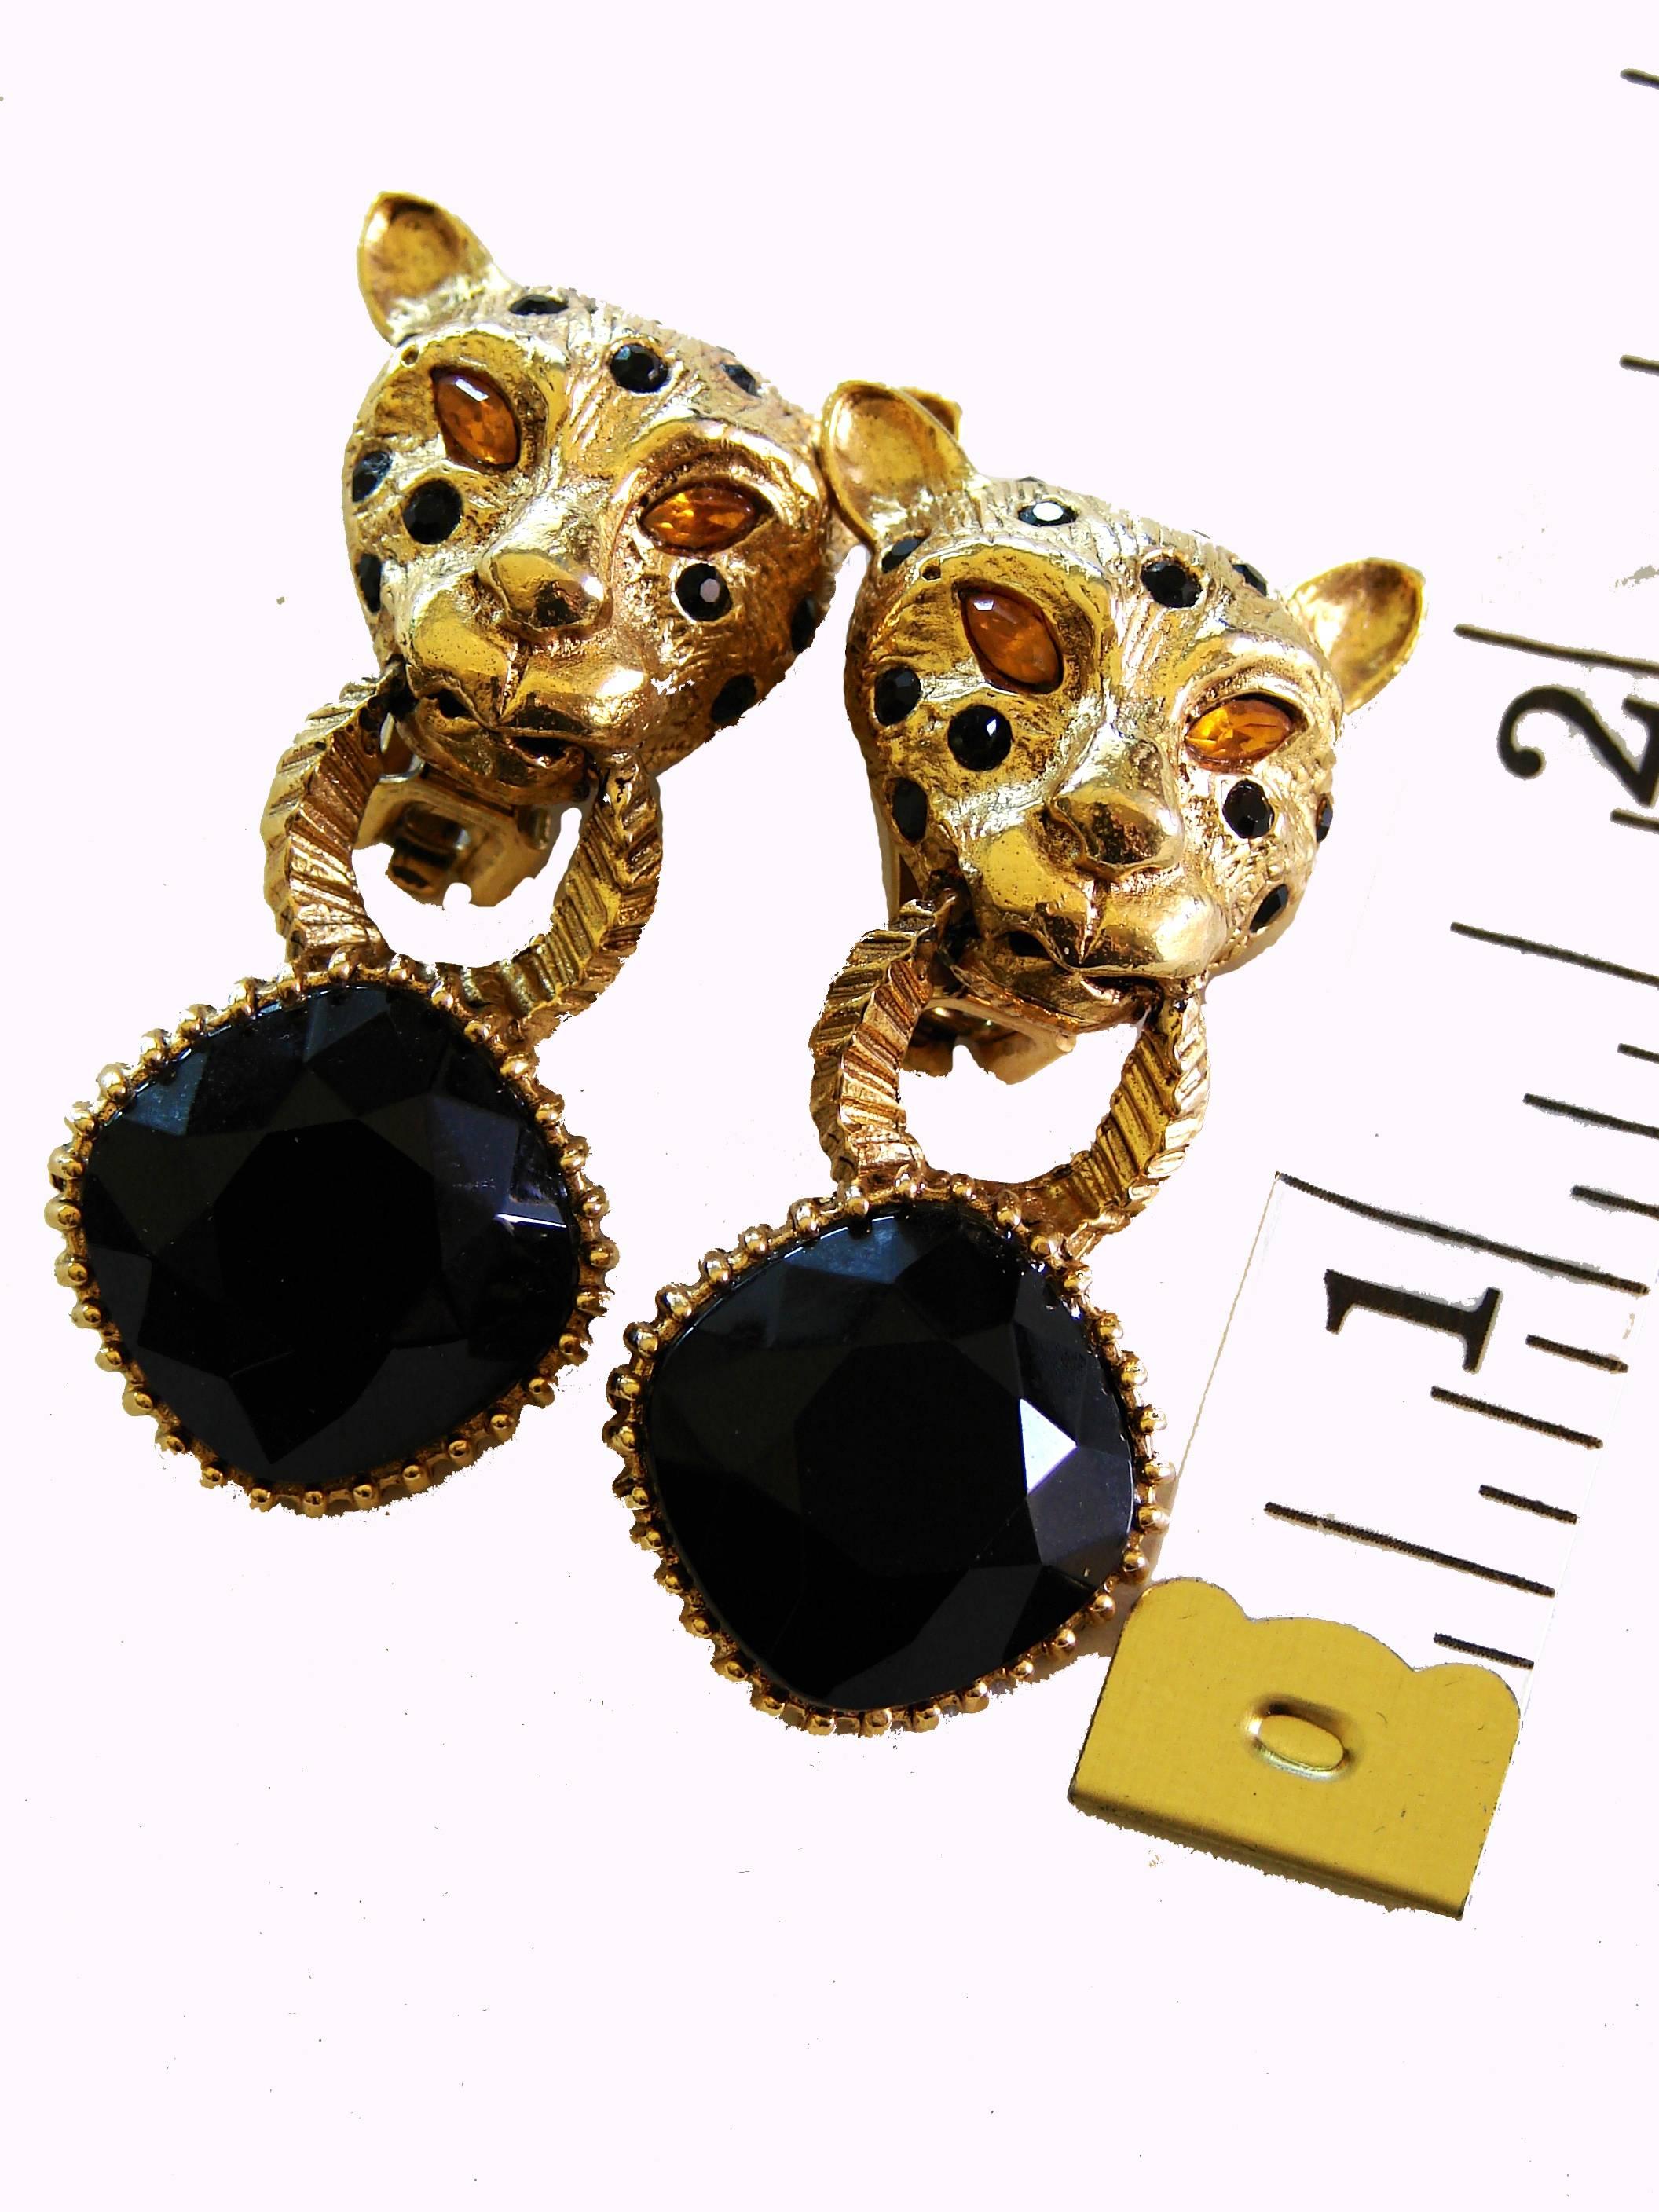 These sparkling Leopard earrings are from Graziano, and measure approximately 2